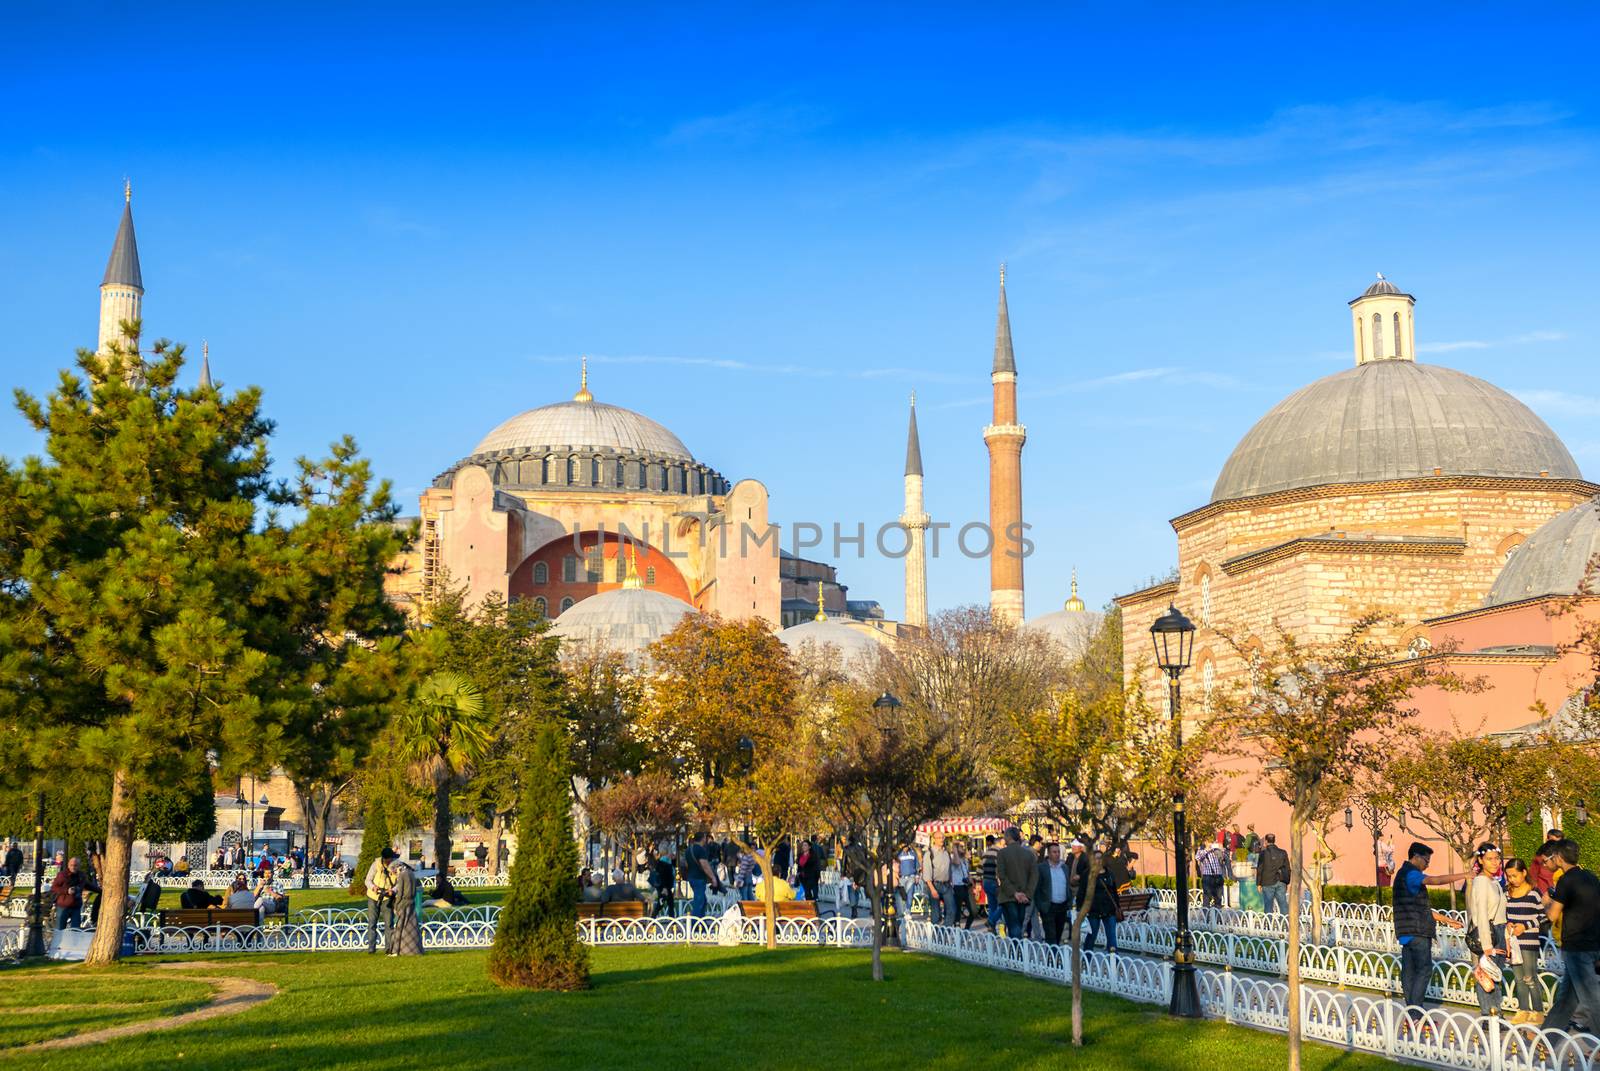 ISTANBUL, TURKEY - SEPTEMBER 14, 2014: Tourists walk in Sultanahmet Square. More than 10 million people visit the city every year.